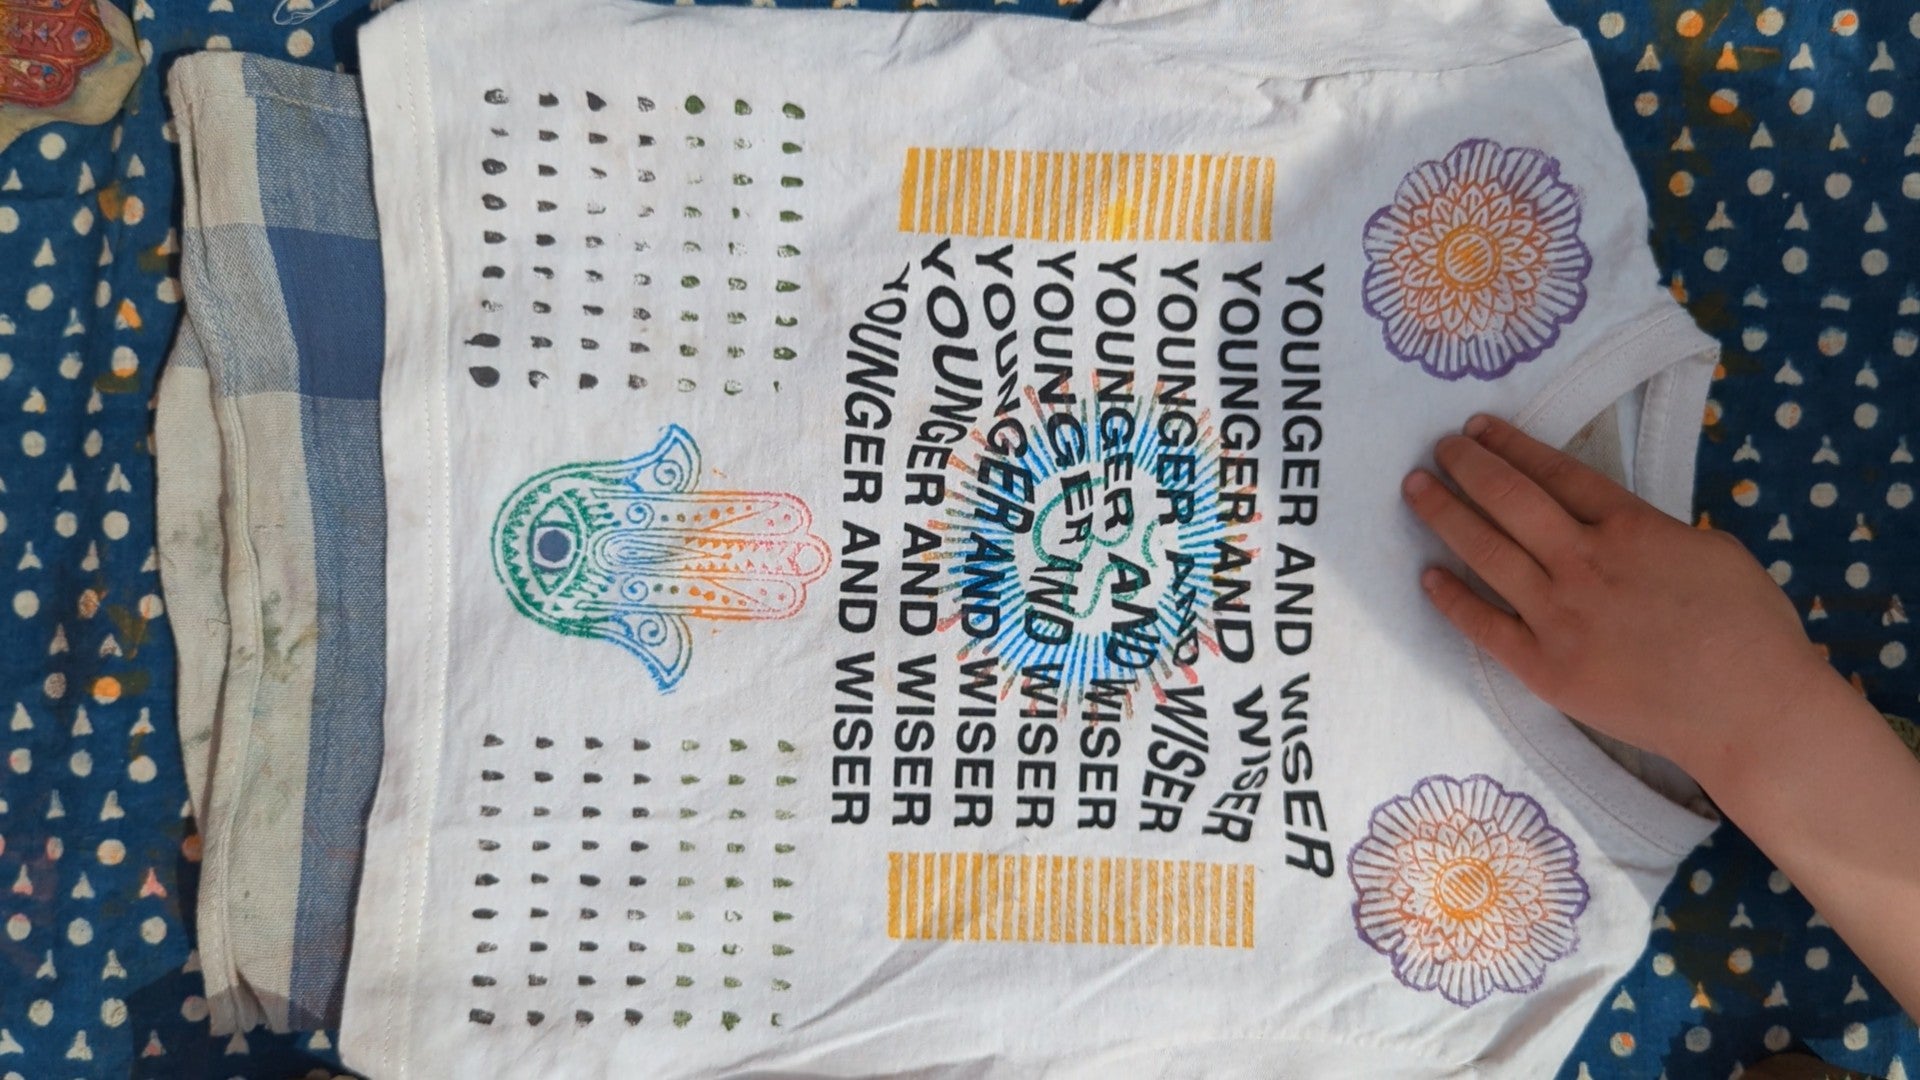 Om Baby X Young Double Block printing workshop 17th June